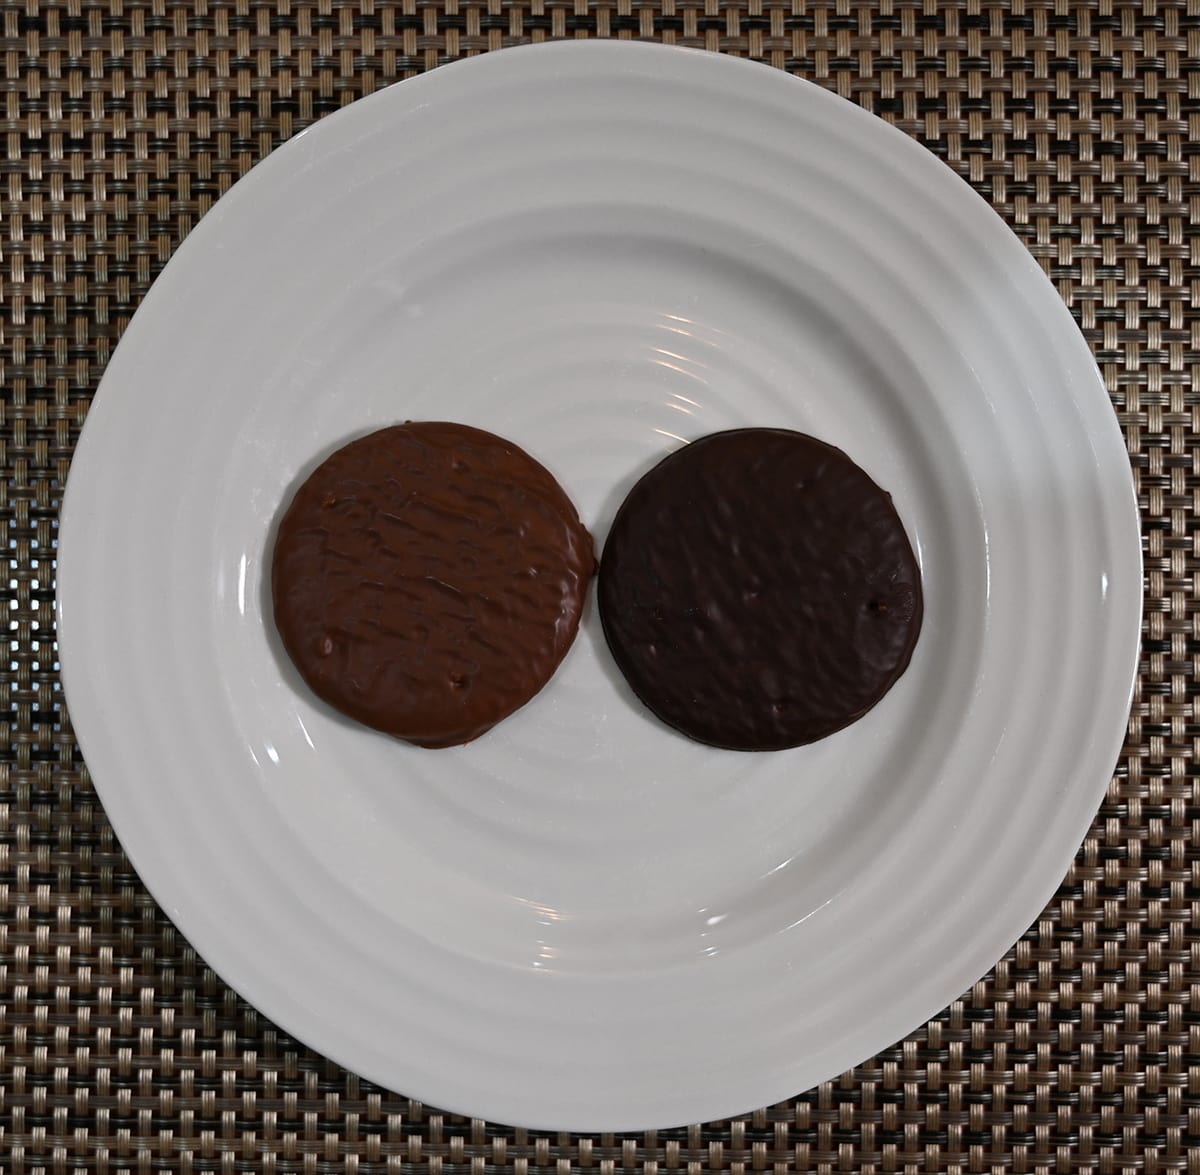 Top down image of a white plate with one milk chocolate butter biscuit beside a dark chocolate butter biscuit on it.